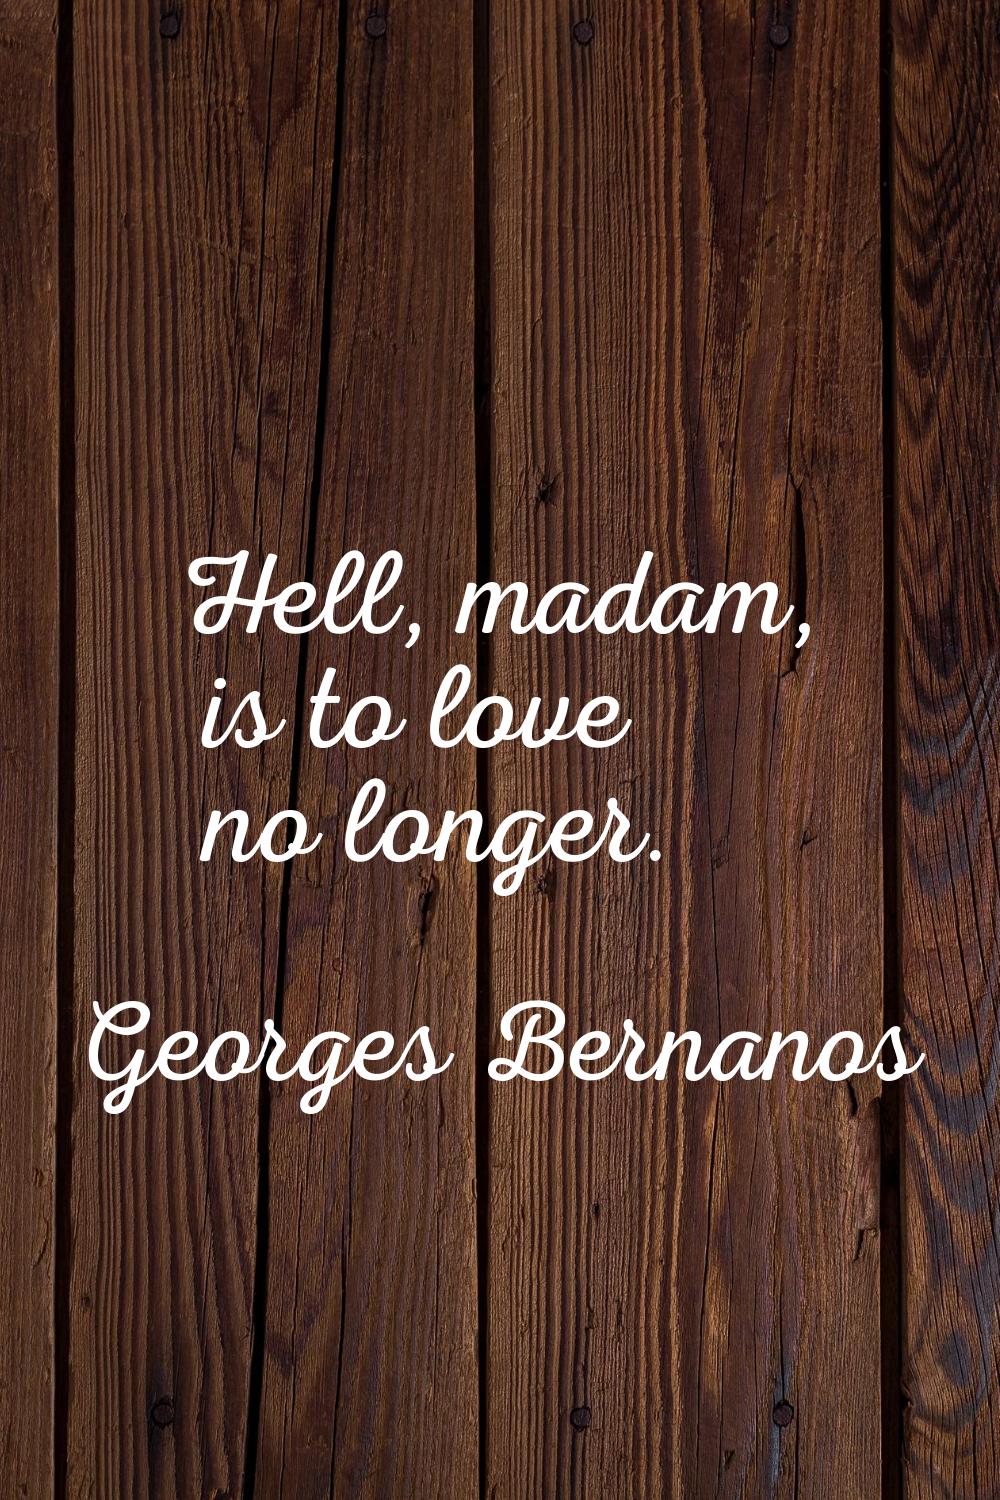 Hell, madam, is to love no longer.